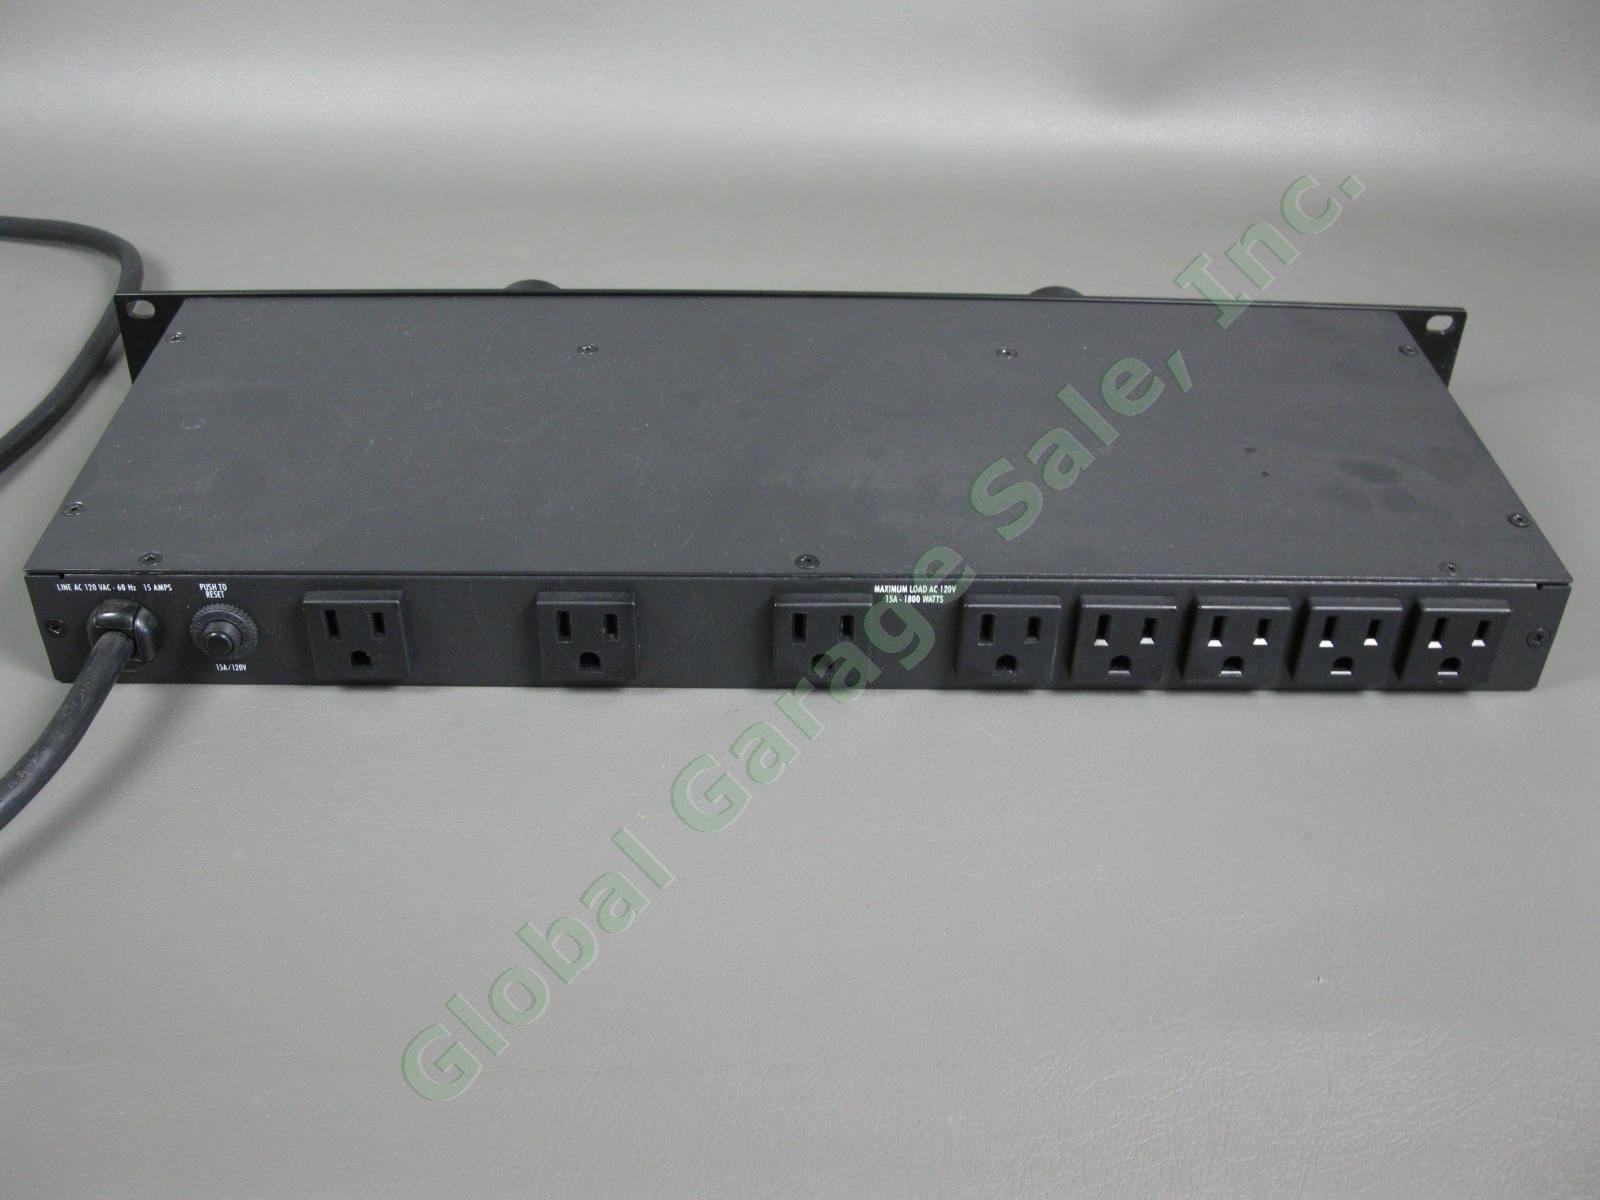 Furman Merit M-8Lx 15A AC Standard Power Conditioner 9 Outlet Rack Mount System 3